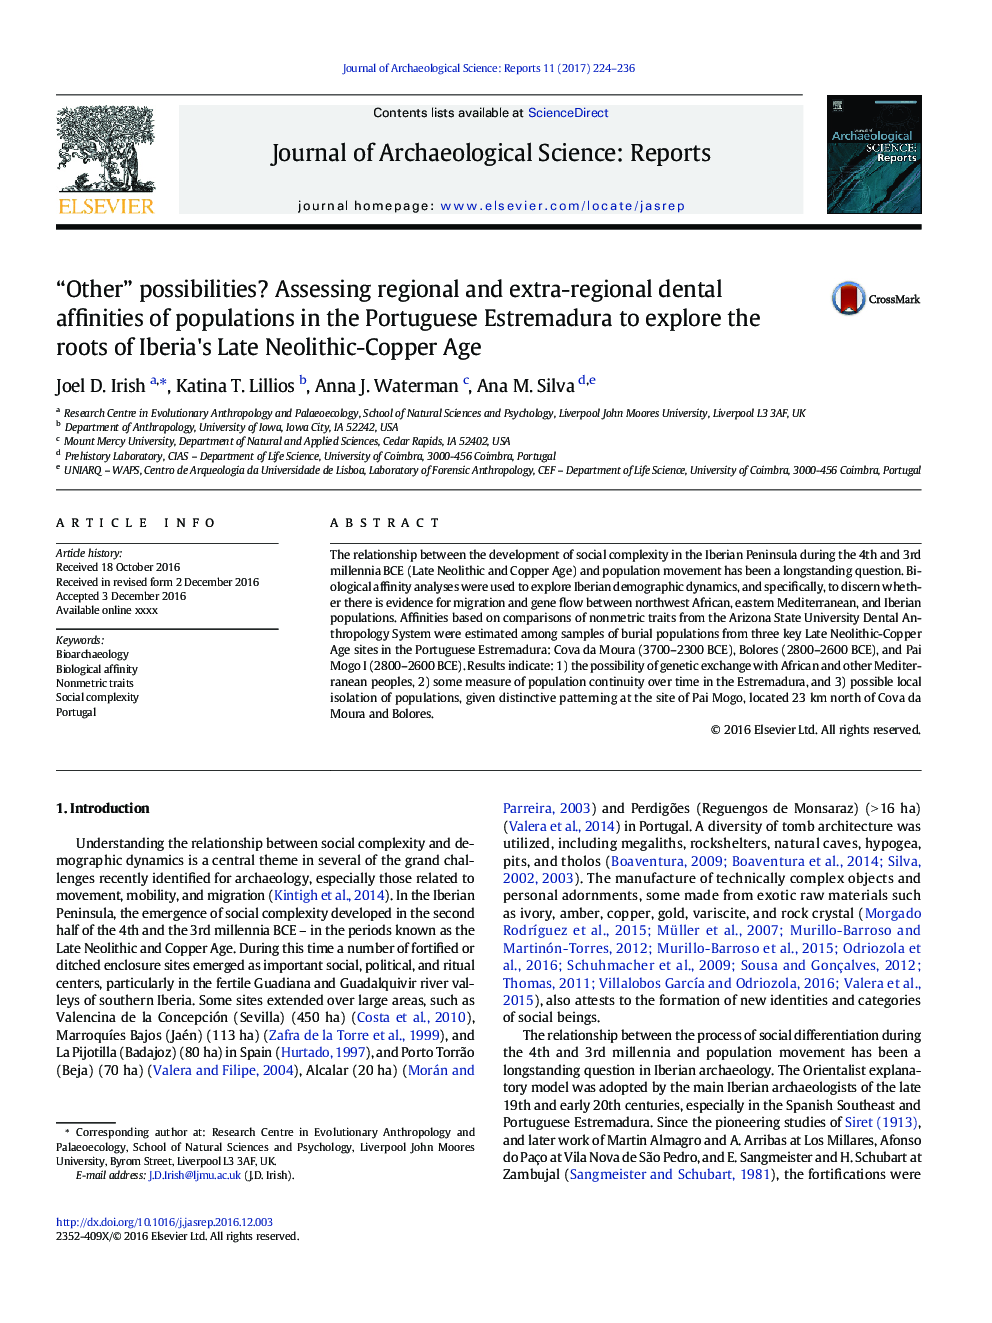 “Other” possibilities? Assessing regional and extra-regional dental affinities of populations in the Portuguese Estremadura to explore the roots of Iberia's Late Neolithic-Copper Age